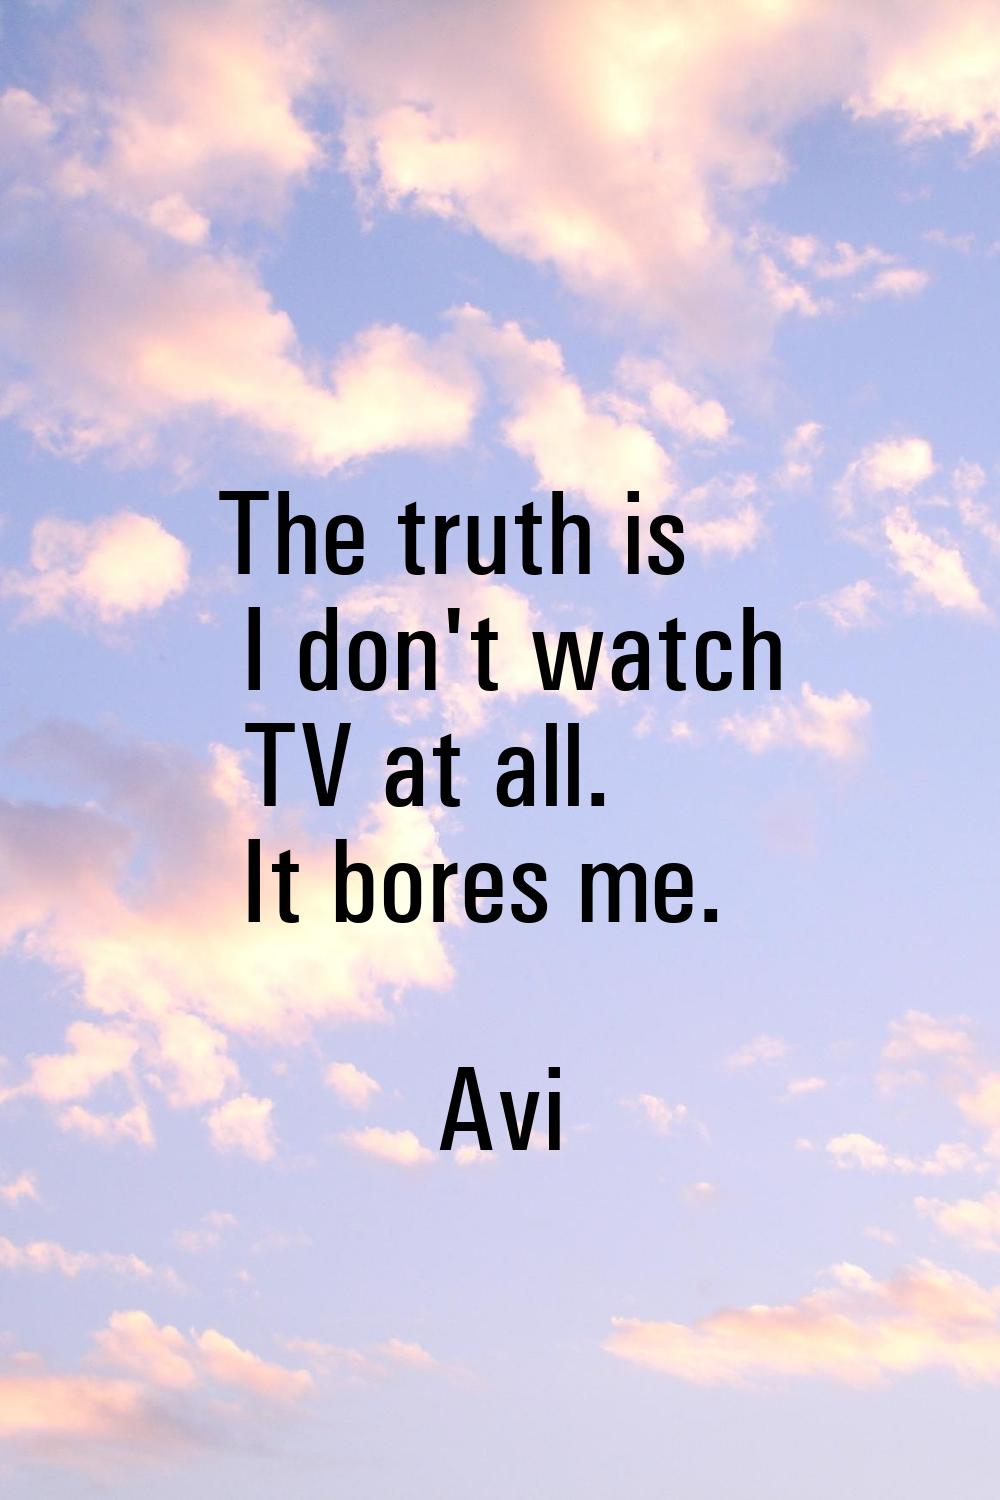 The truth is I don't watch TV at all. It bores me.